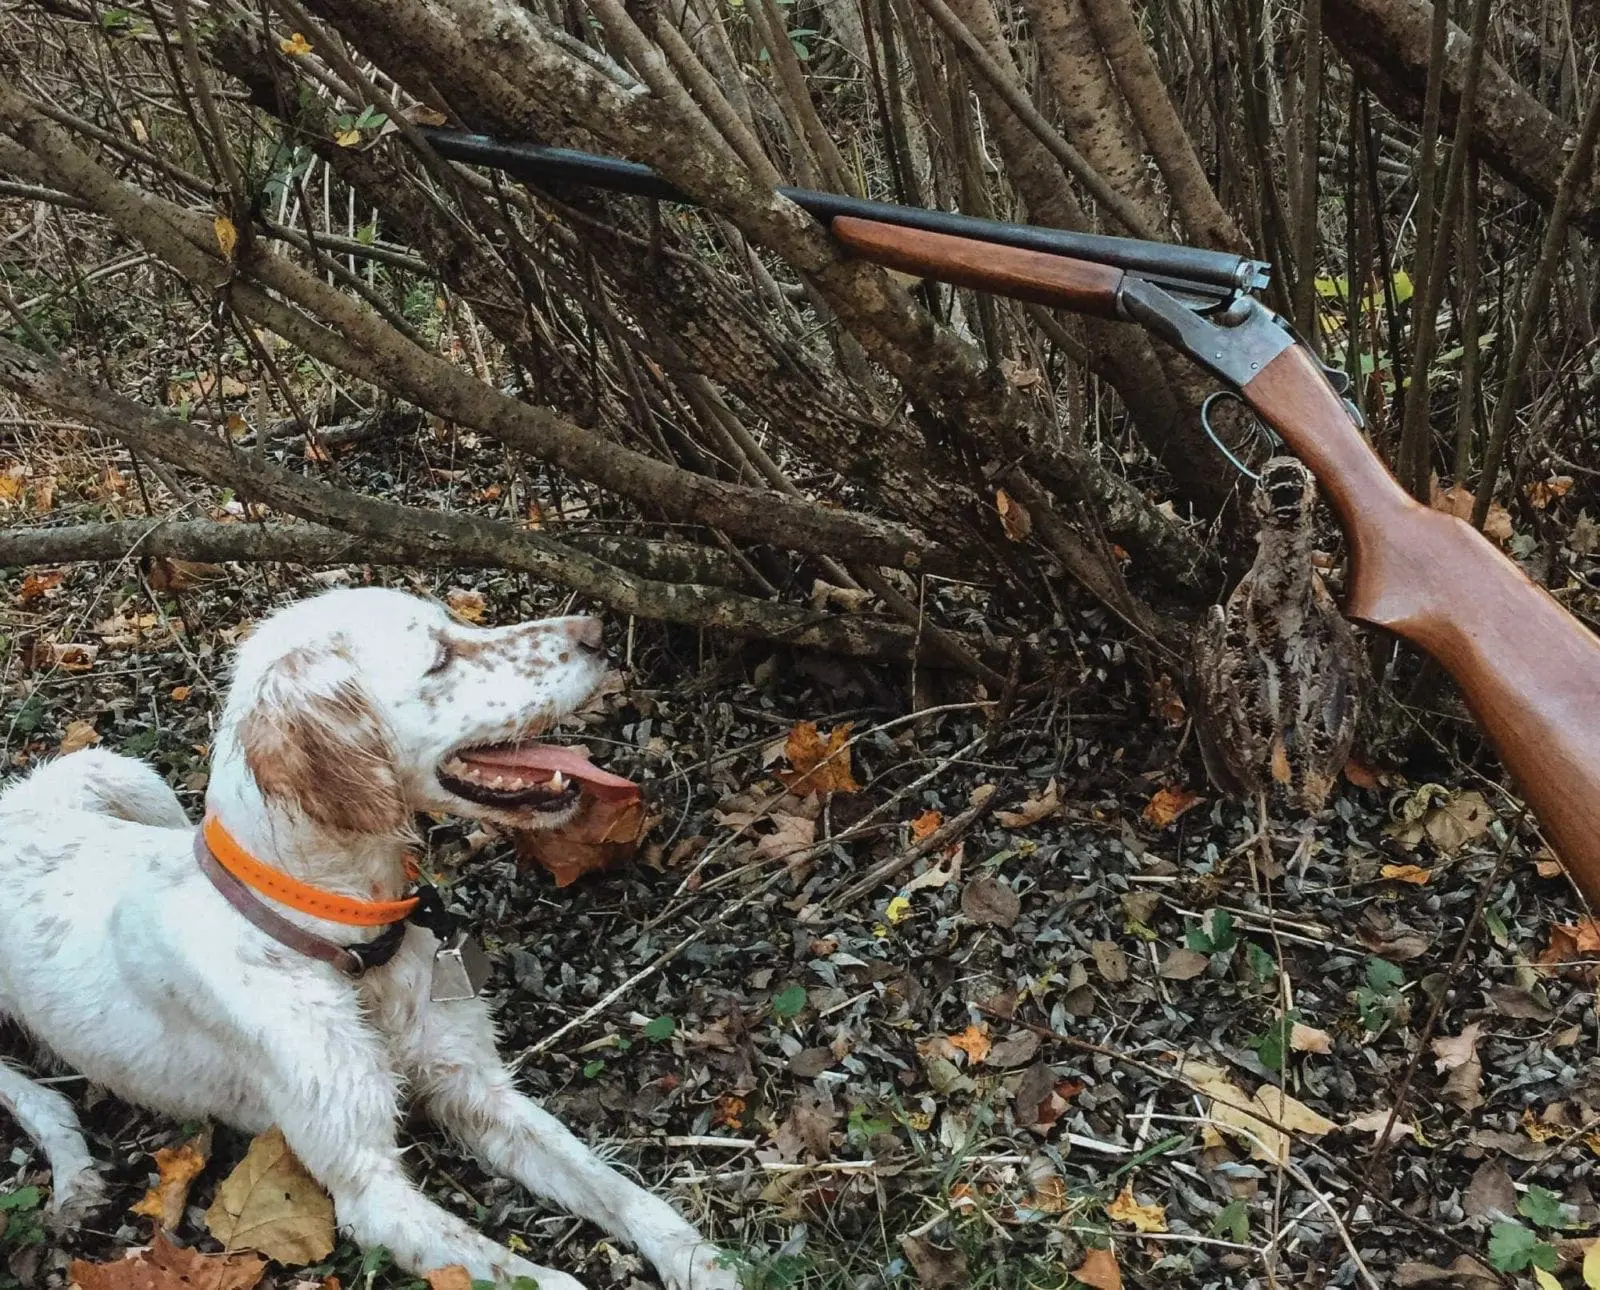 A day bird hunting with the Stevens 315 side-by-side shotgun